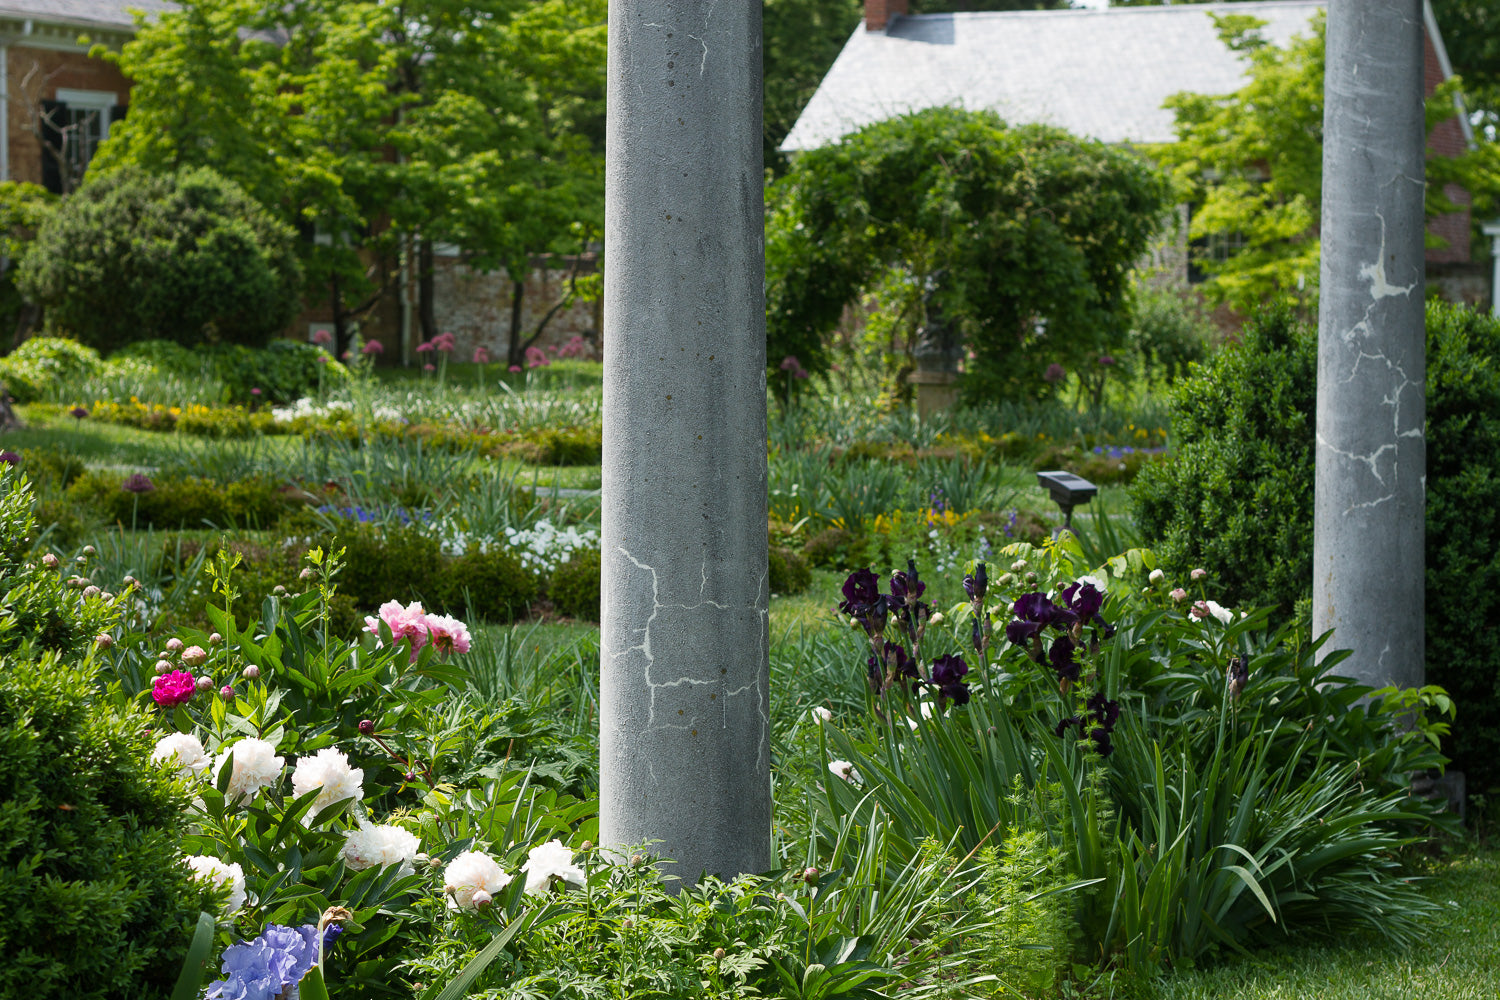 Gardens with columns and flower beds